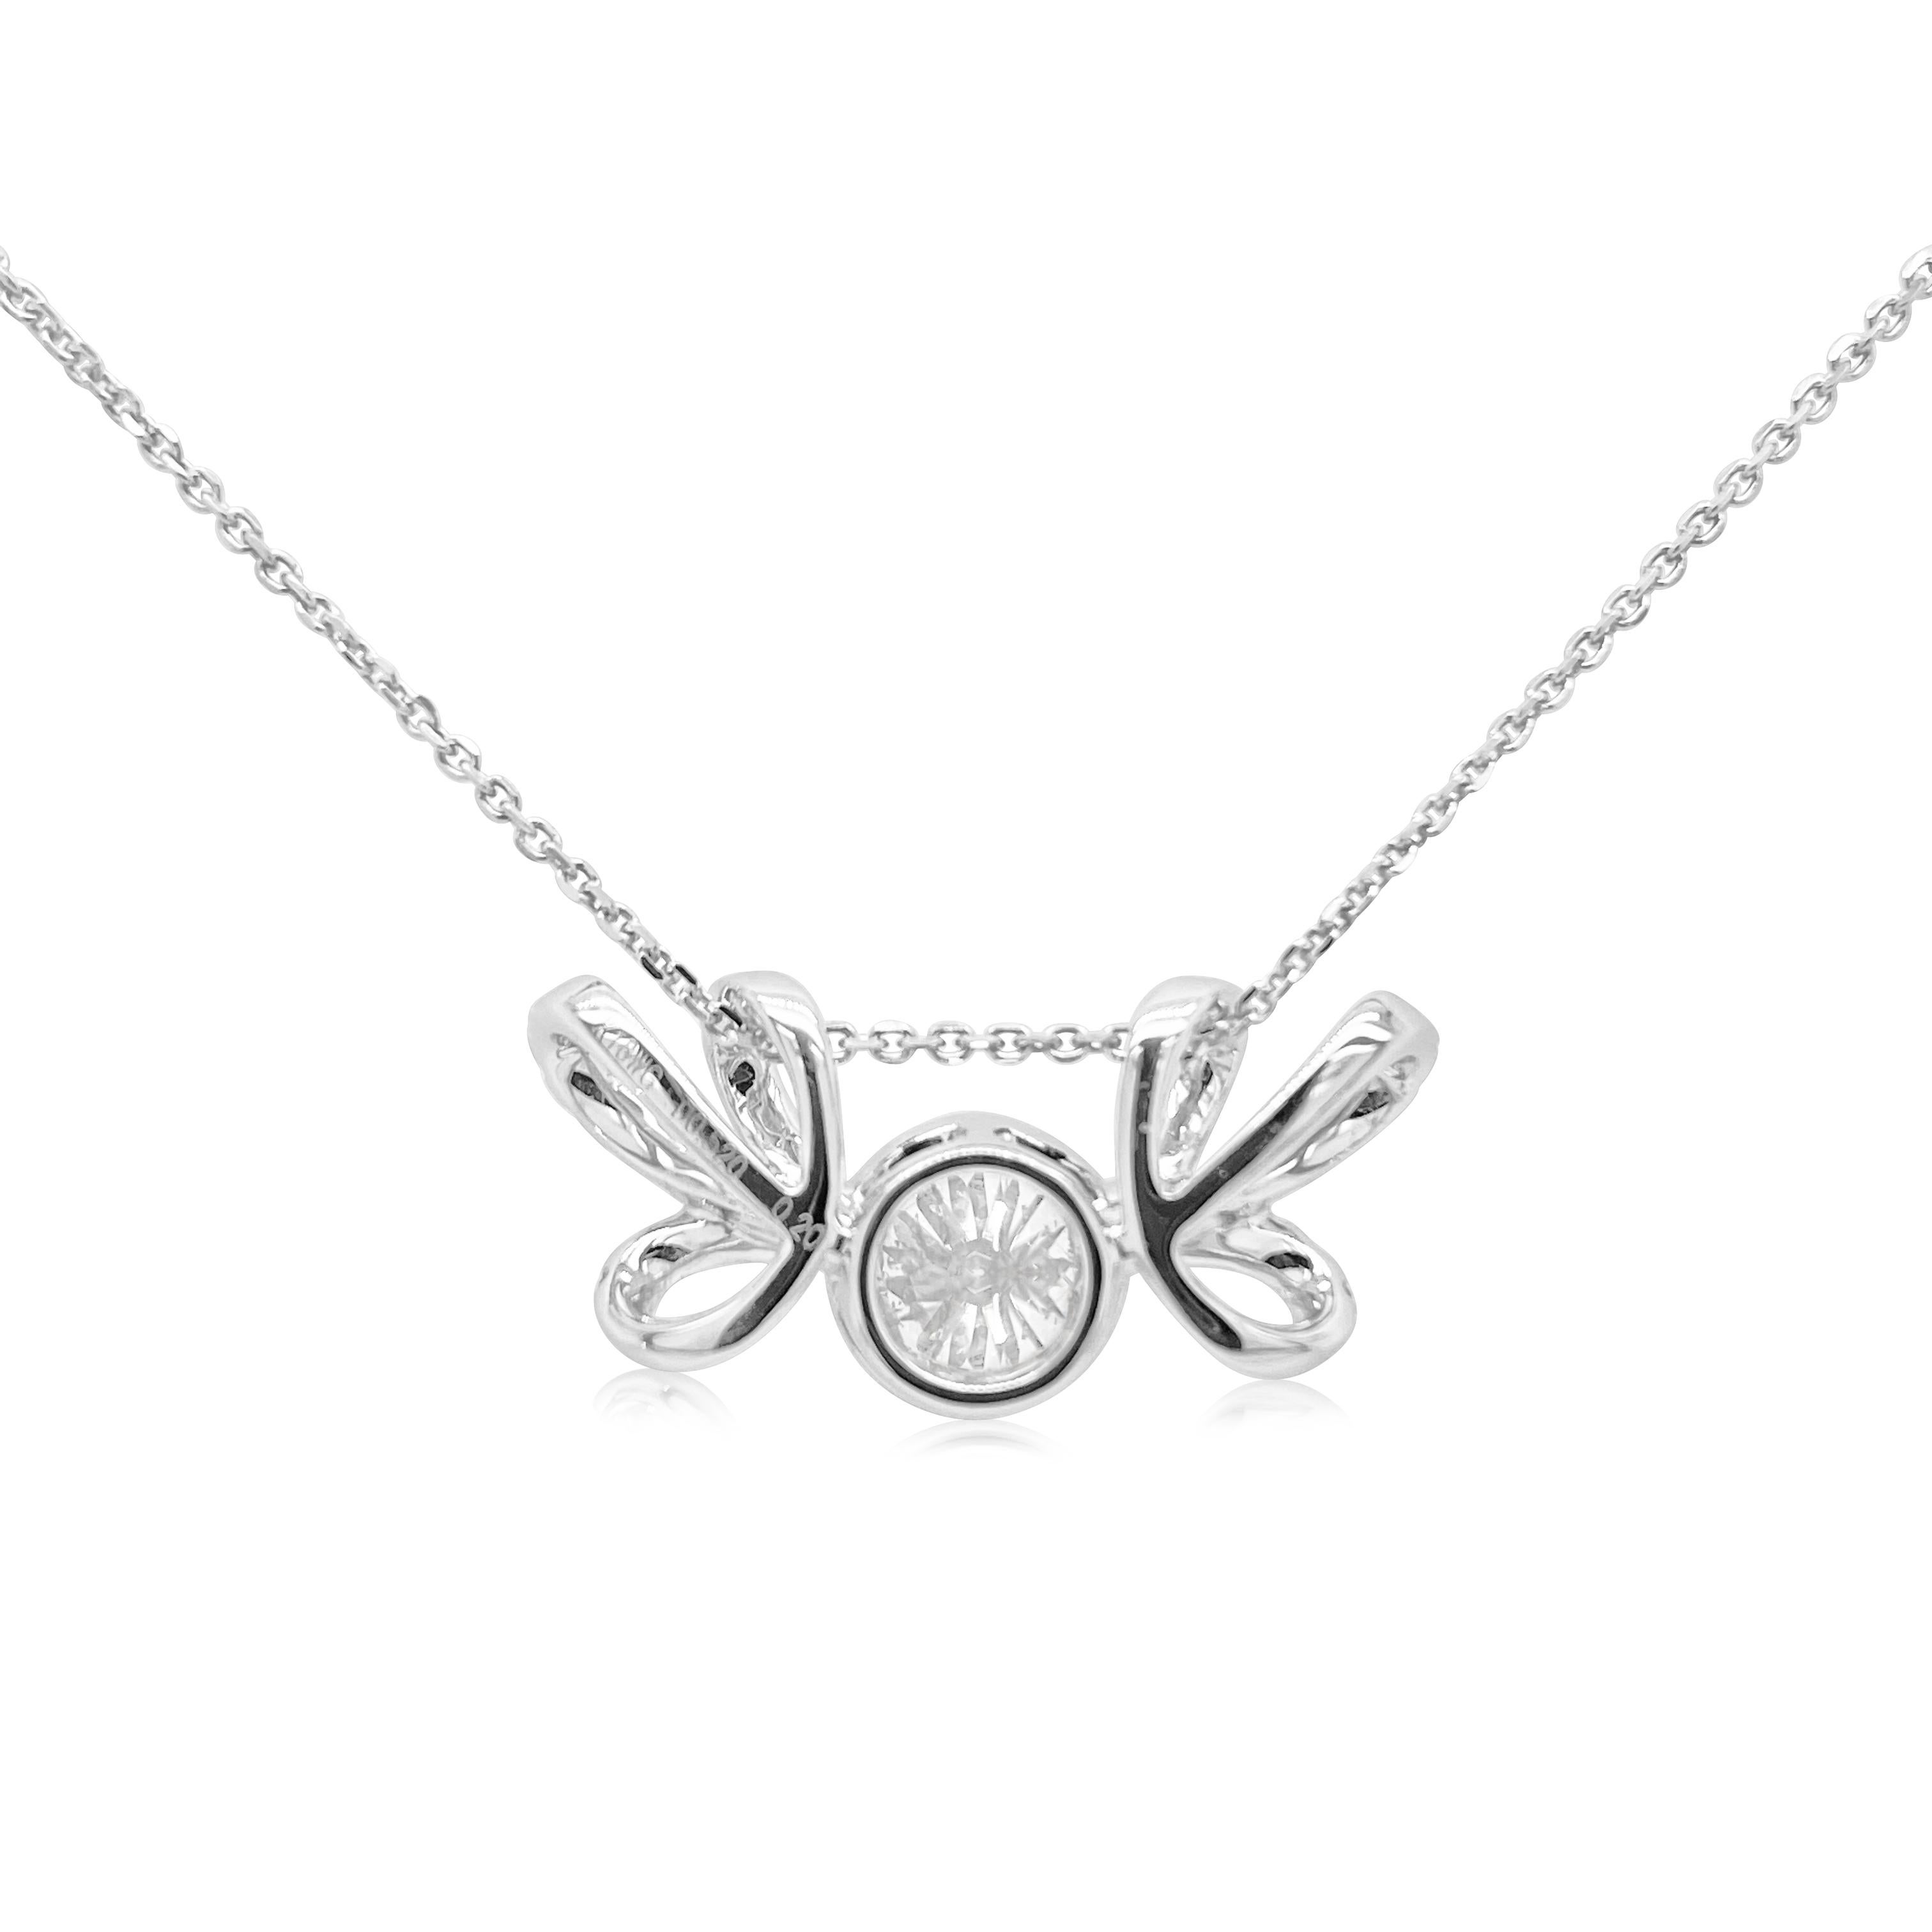 Contemporary Certified White diamond Pendant made in white Gold with Platinum Chain For Sale